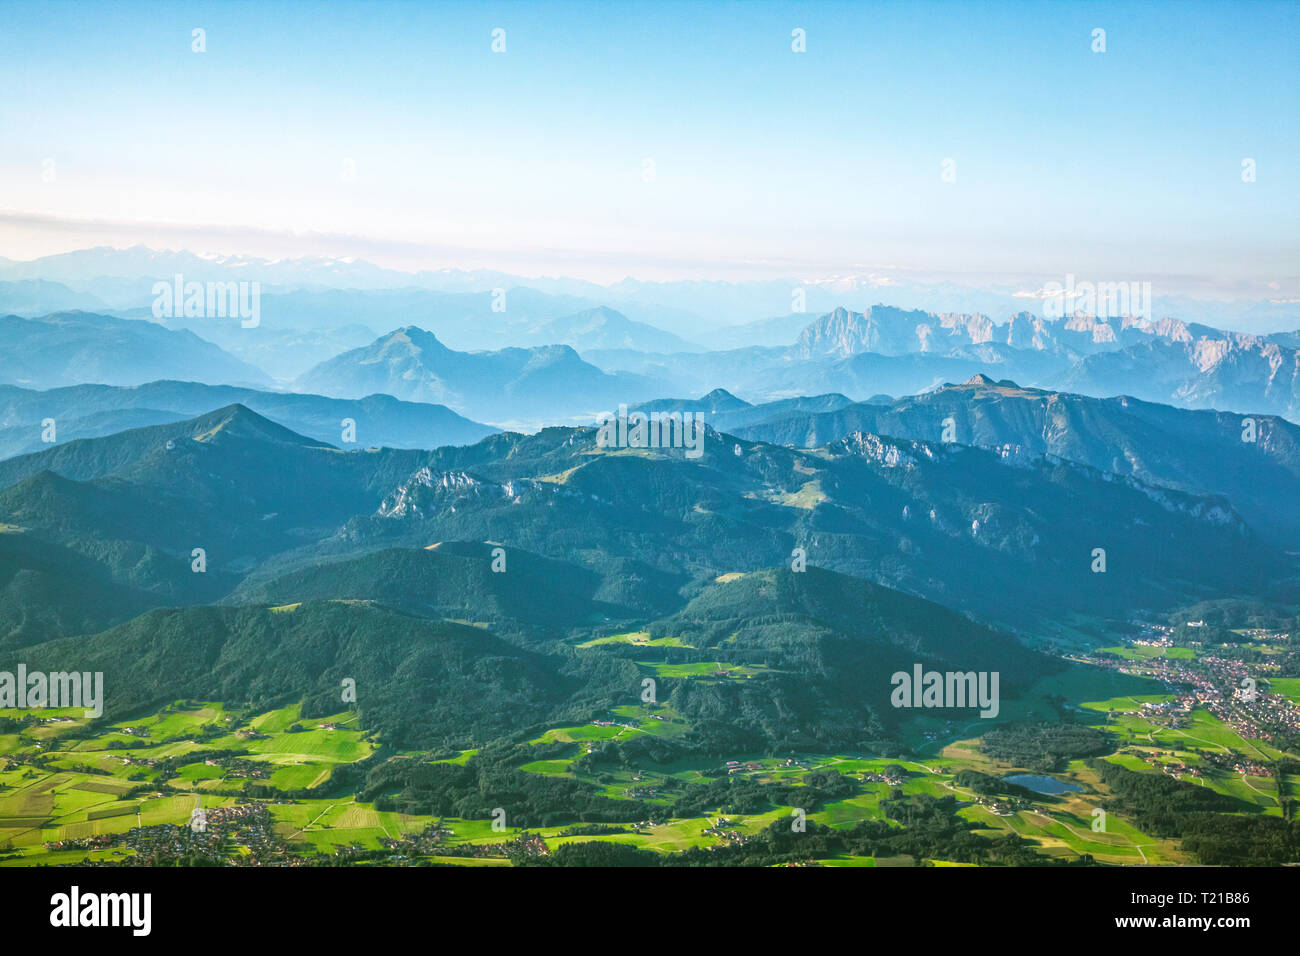 Germany, Bavaria, Chiemgau, Prien, Aerial view of Alps, Kampenwand in the foreground, Kaiser Mountains in the background Stock Photo